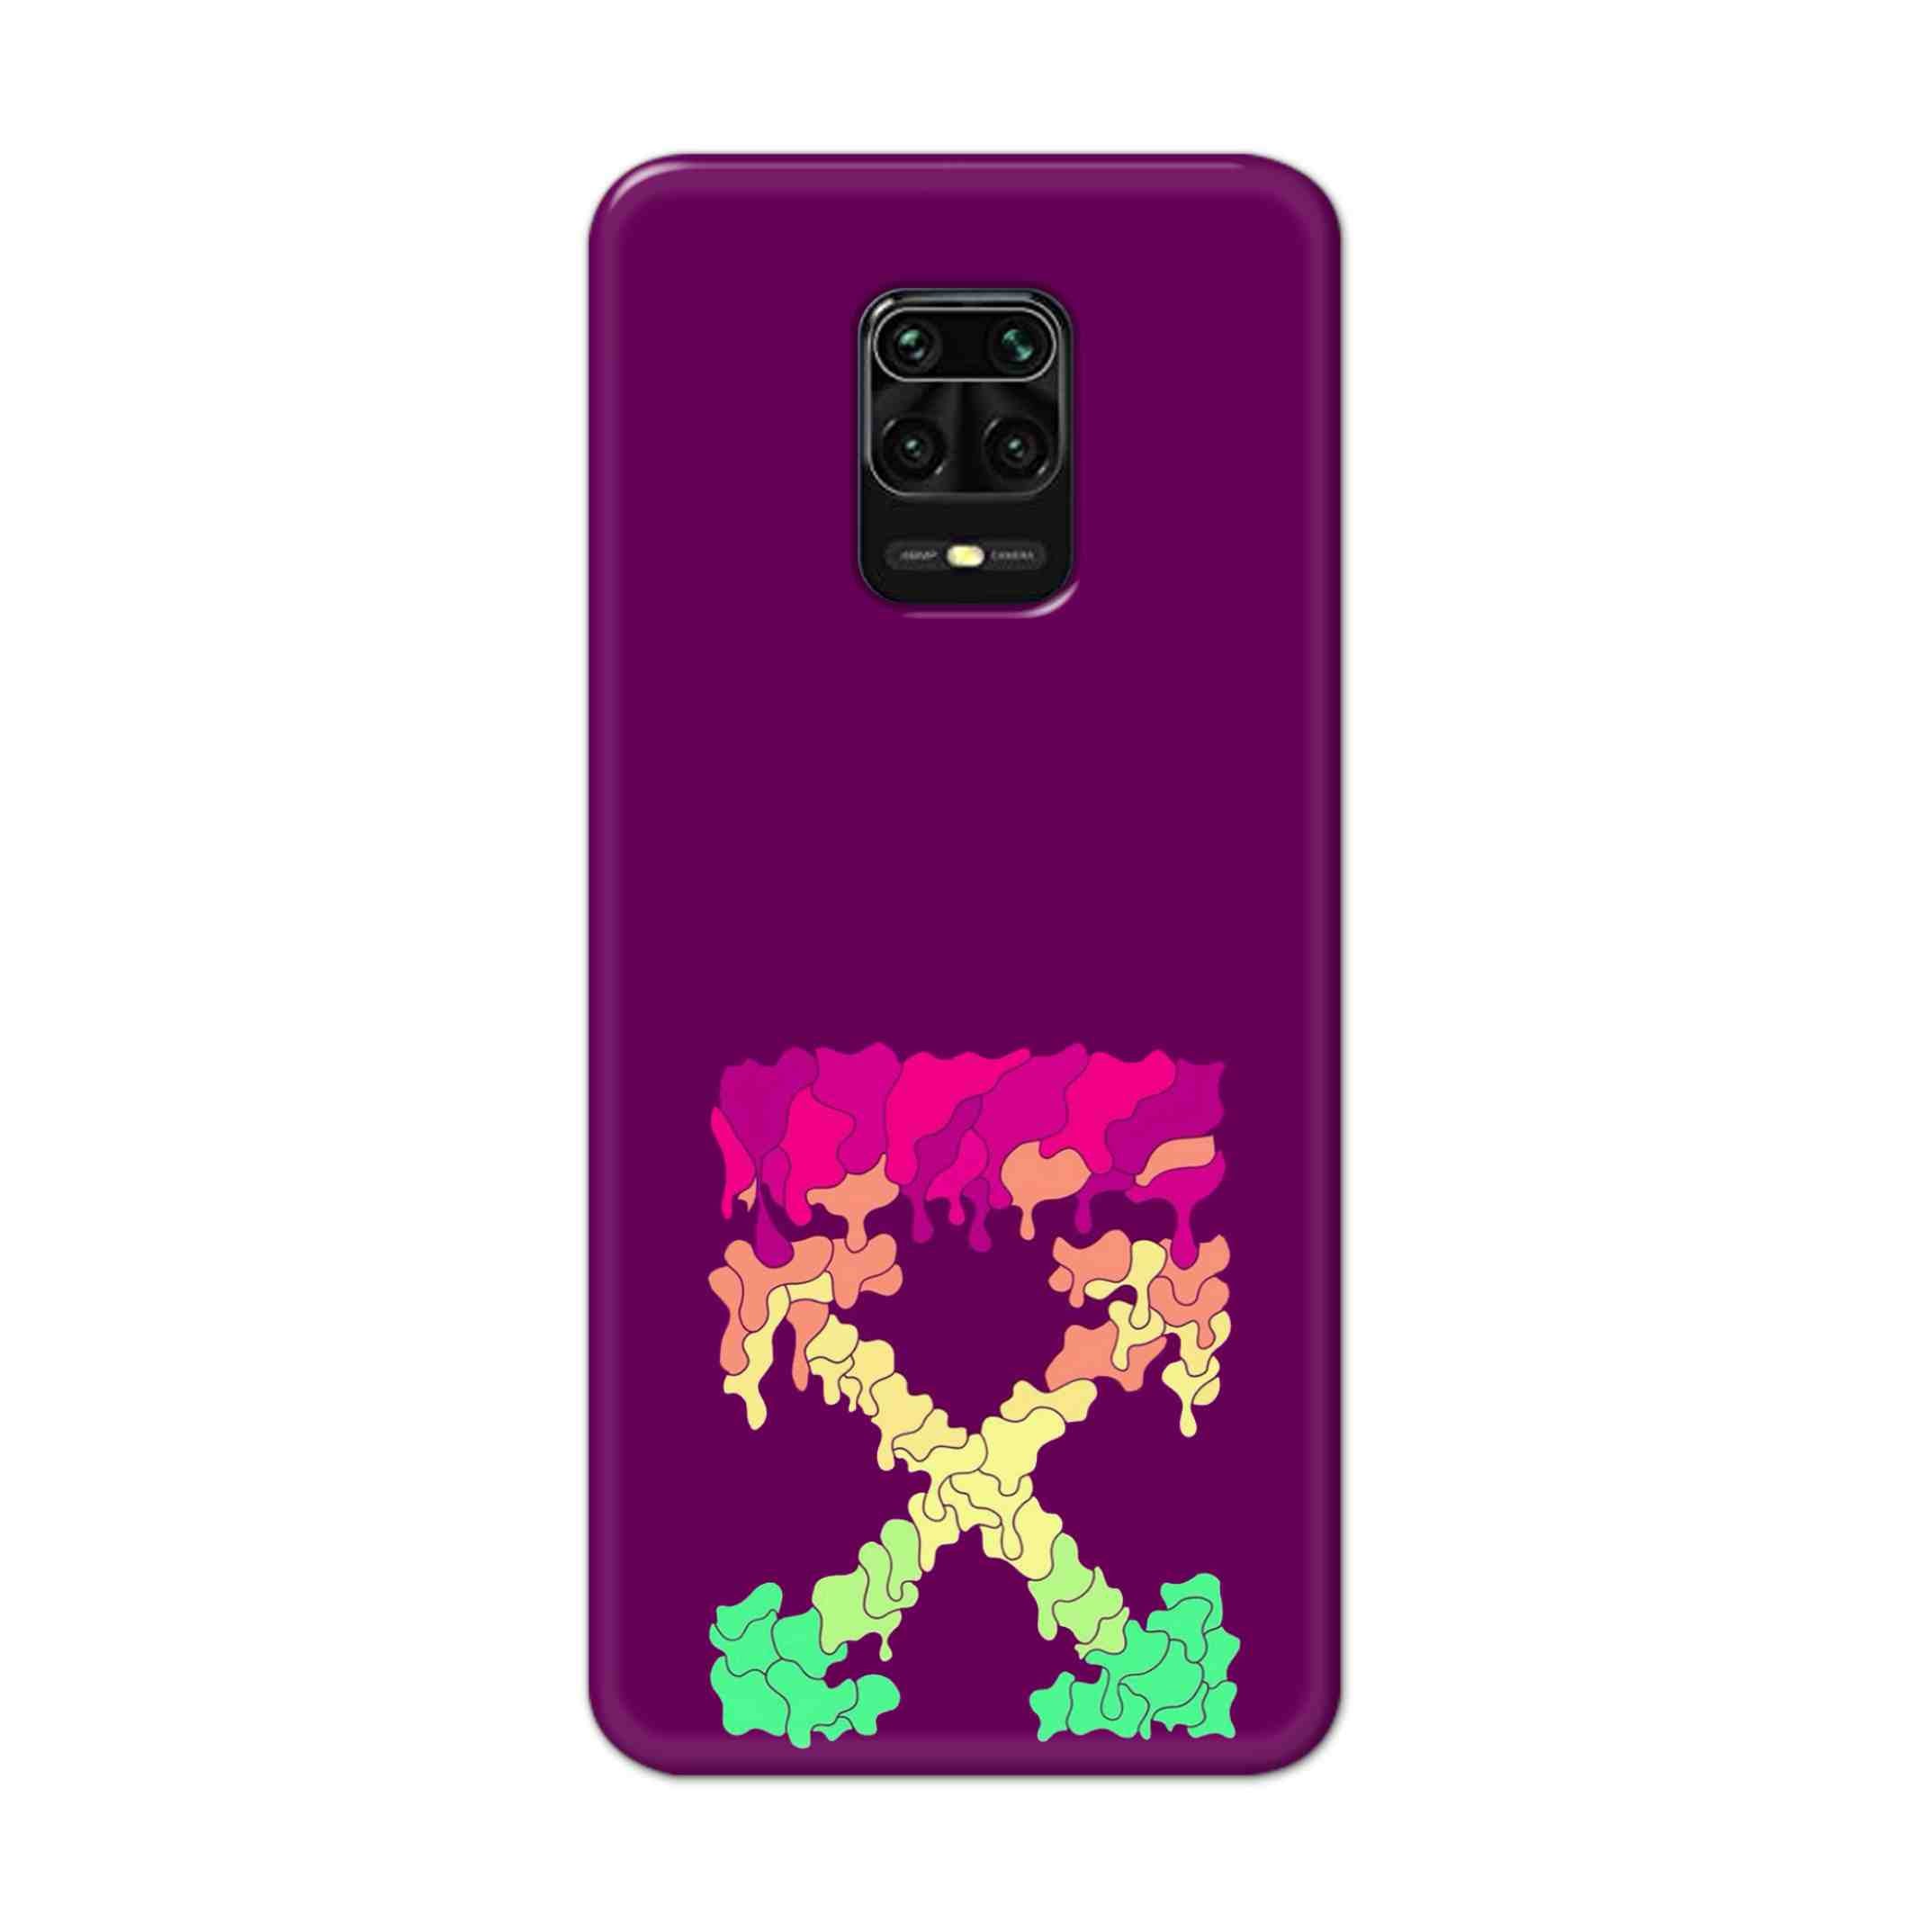 Buy X.O Hard Back Mobile Phone Case Cover For Redmi Note 9 Pro Online